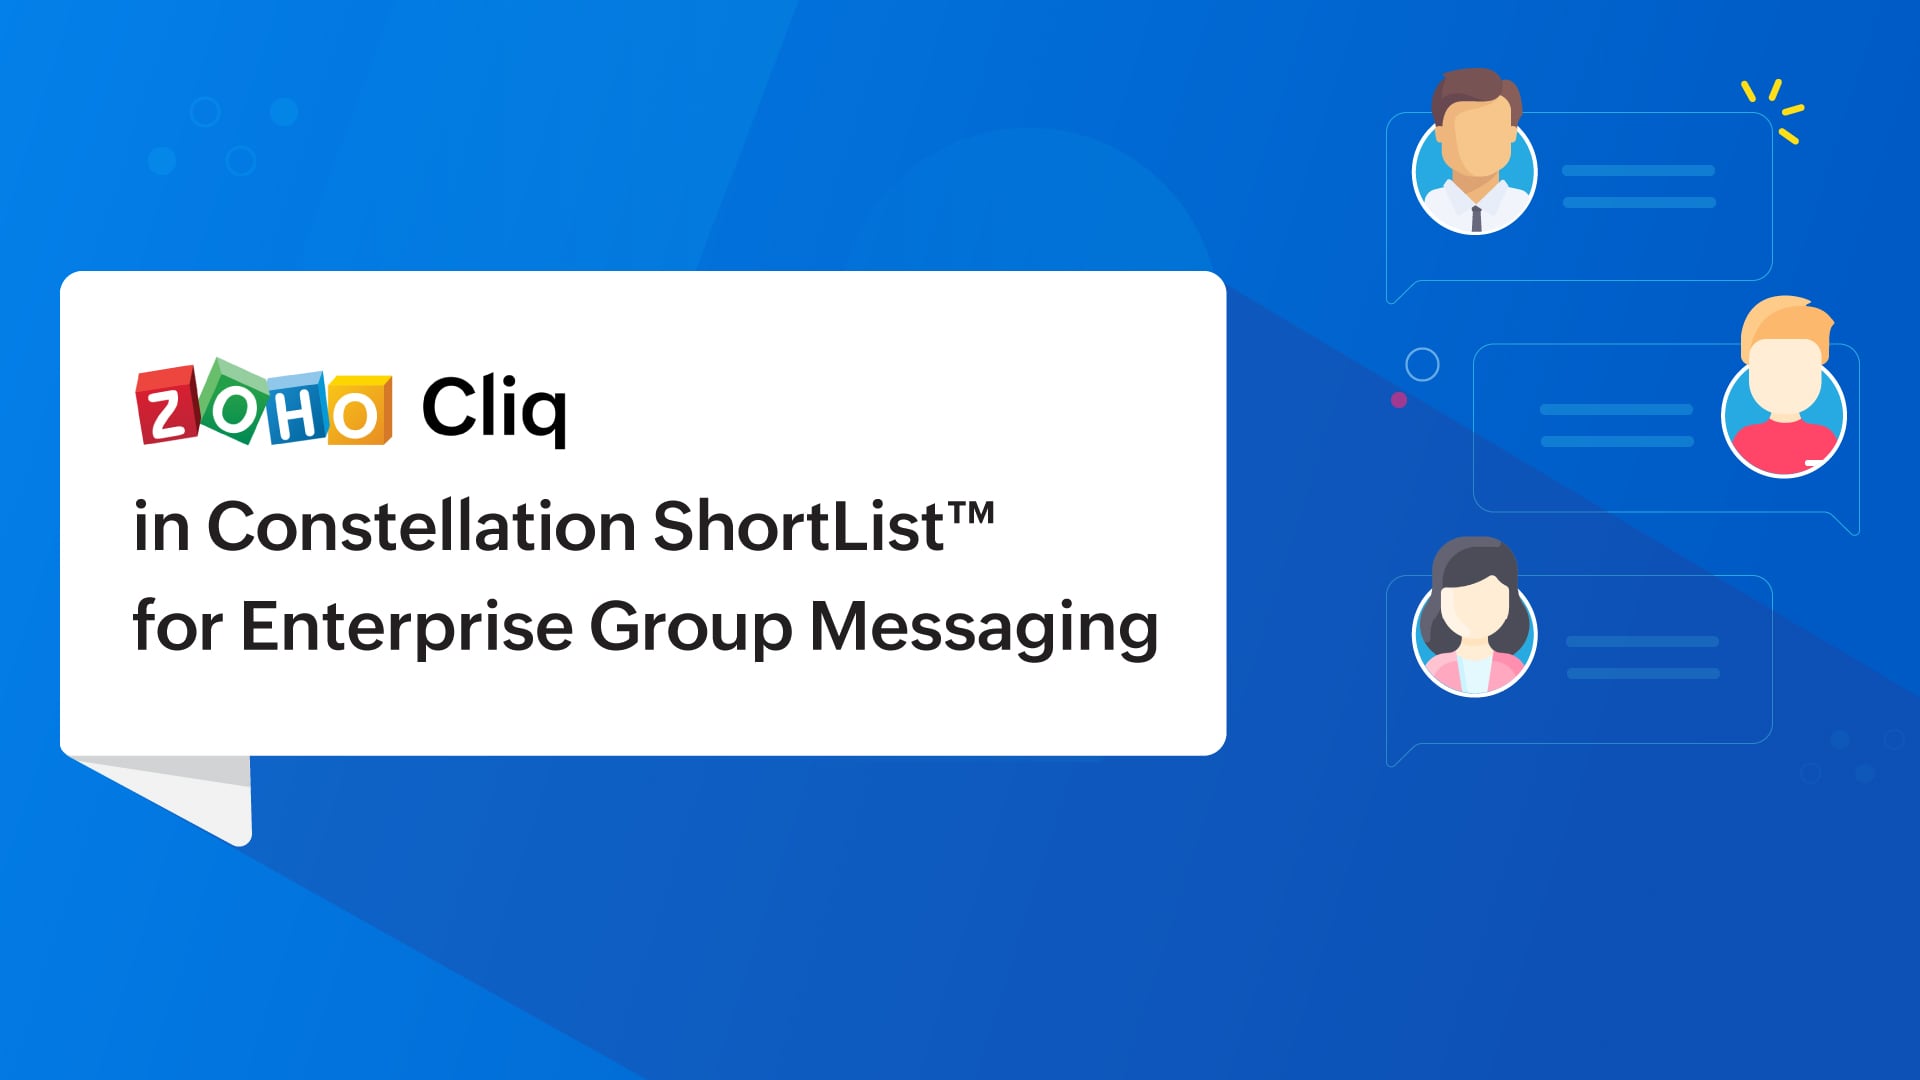 Zoho Cliq recognized in Constellation ShortList™ for Enterprise Group Messaging